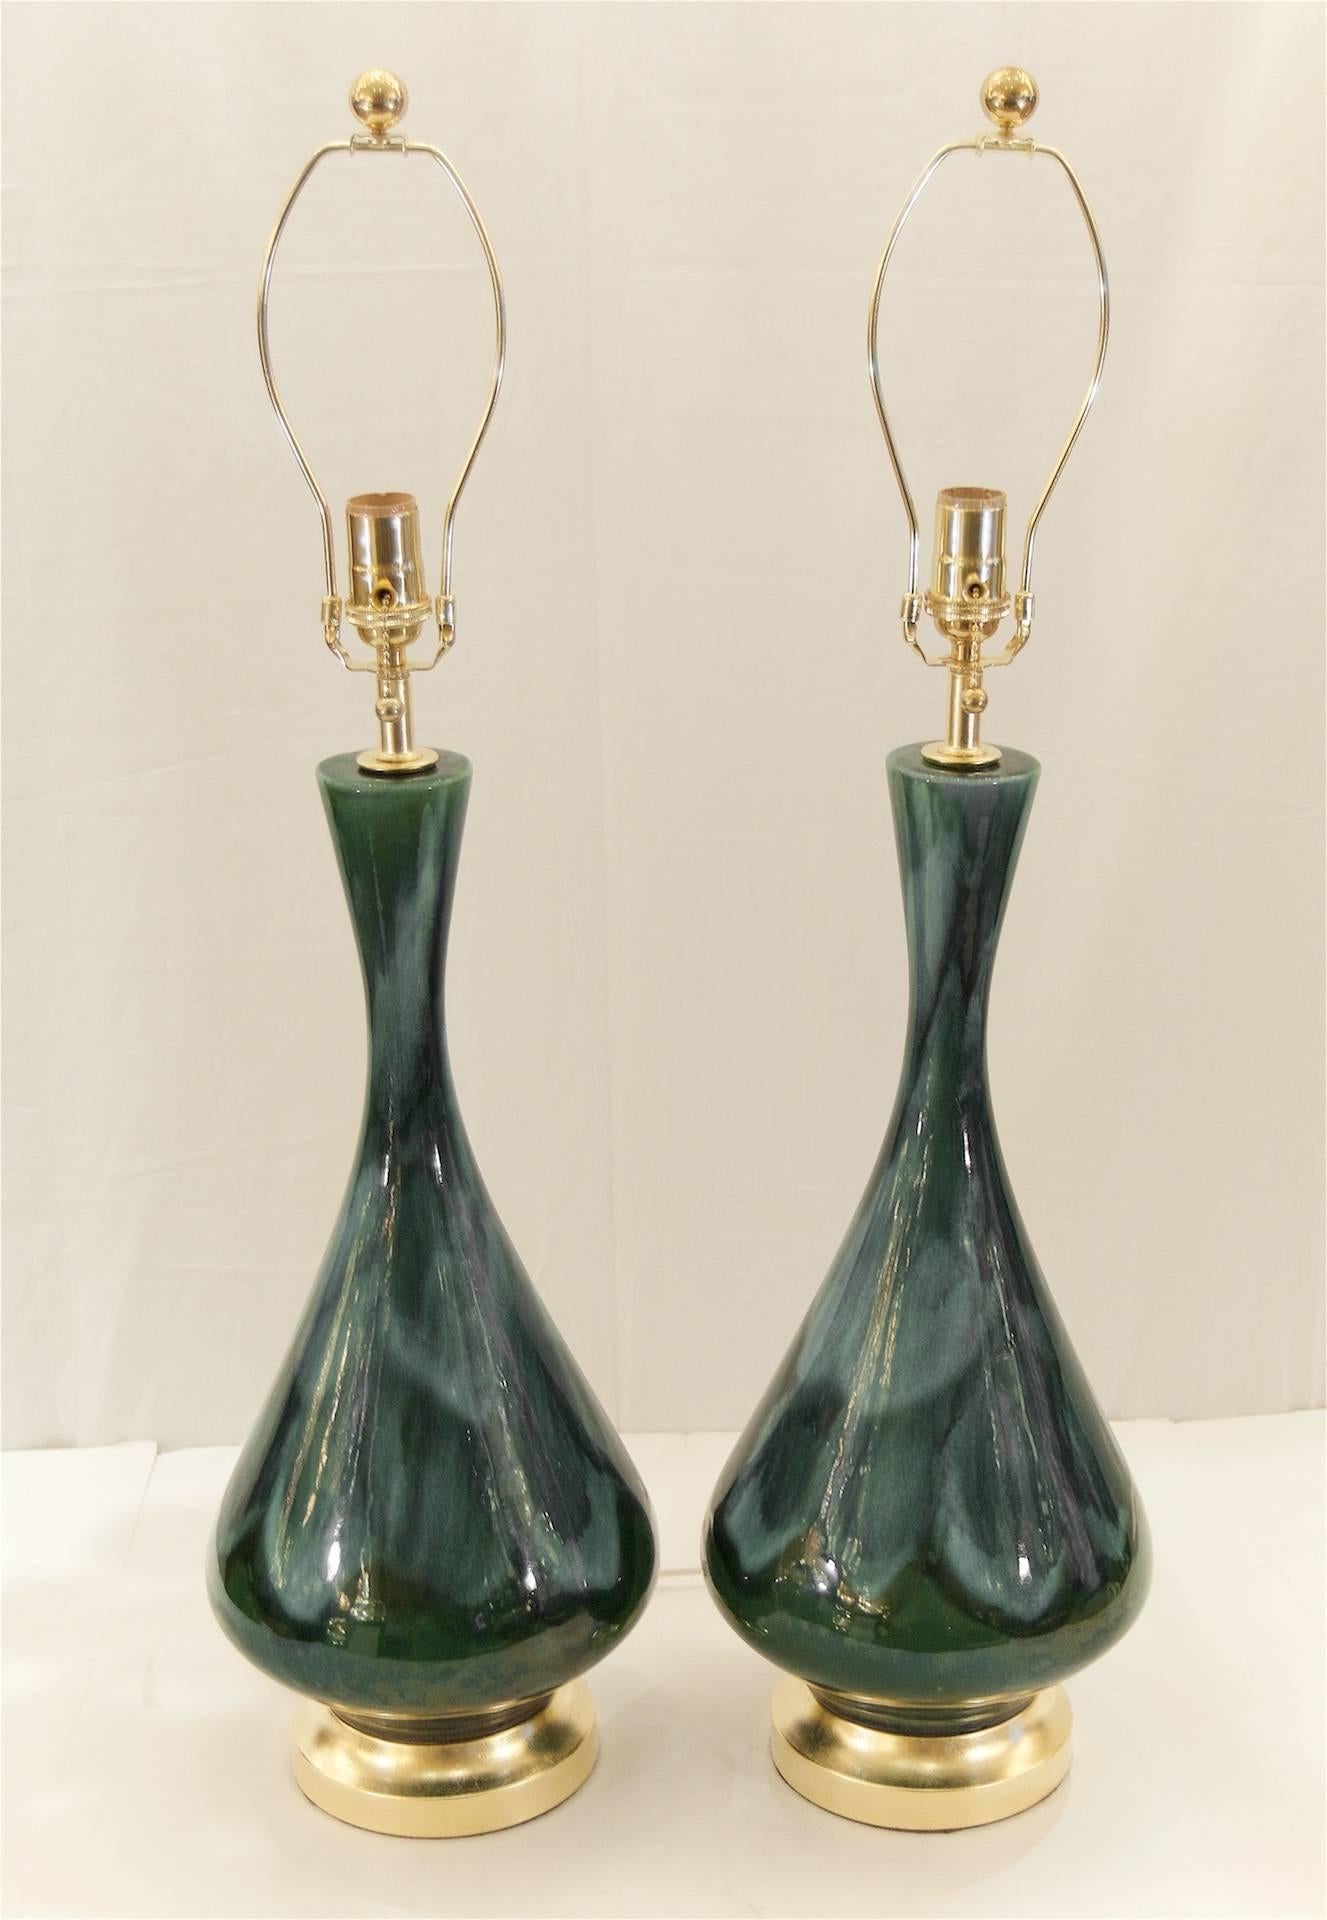 Excellent pair of Royal Haeger blue and green tones drip glaze table lamps; unusually deep and variegated glaze for this iconic design. Hardware newly gilt.

New wiring and sockets.

Measure: Height listed is with 9